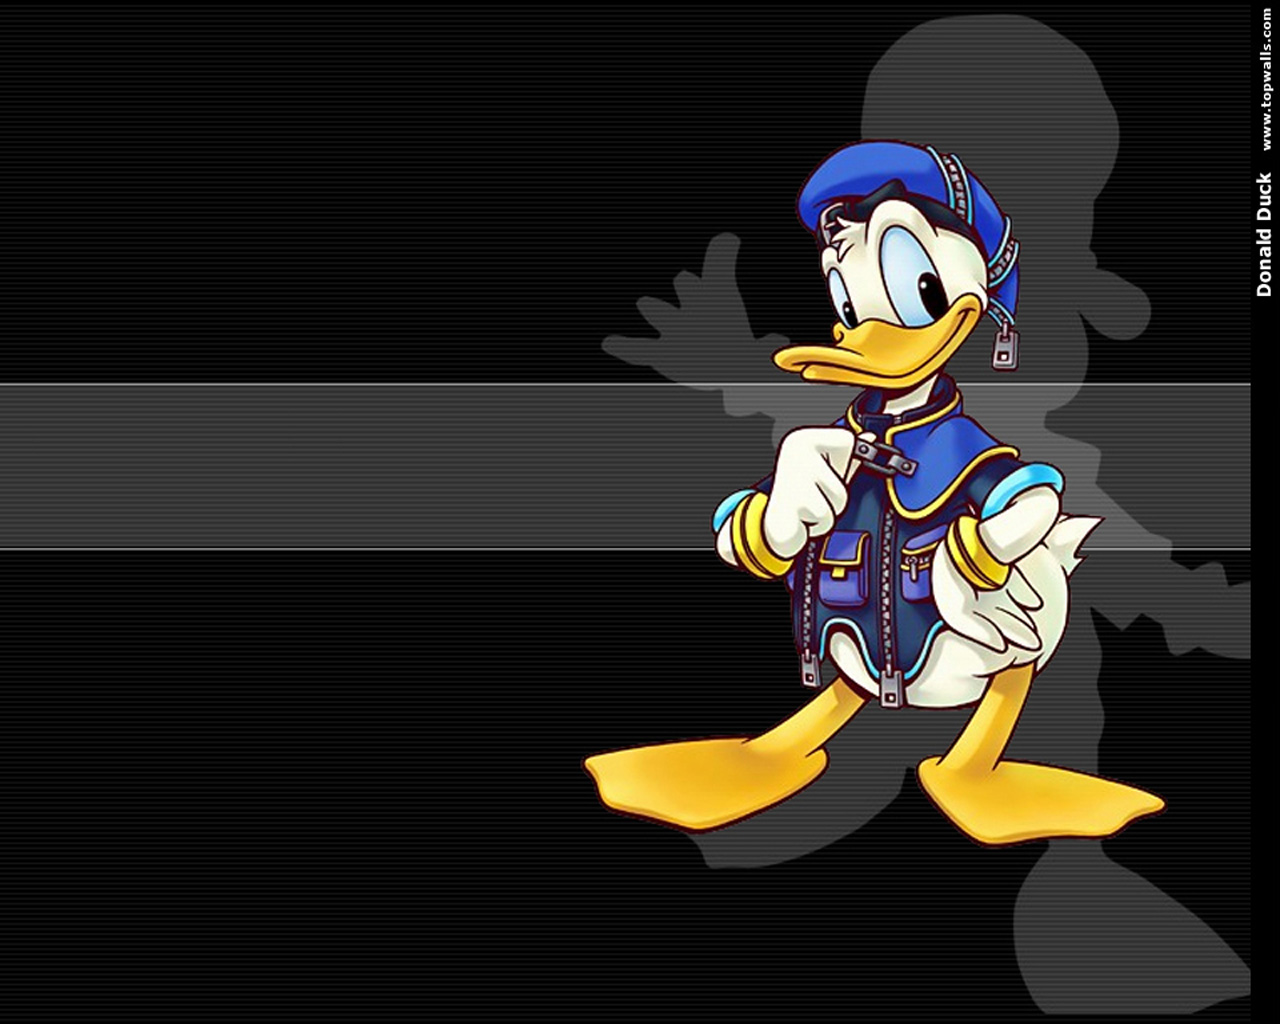 Free Download Where Is Wallpaper Donald Duck Wallpaper Hd 1280x1024 For Your Desktop Mobile